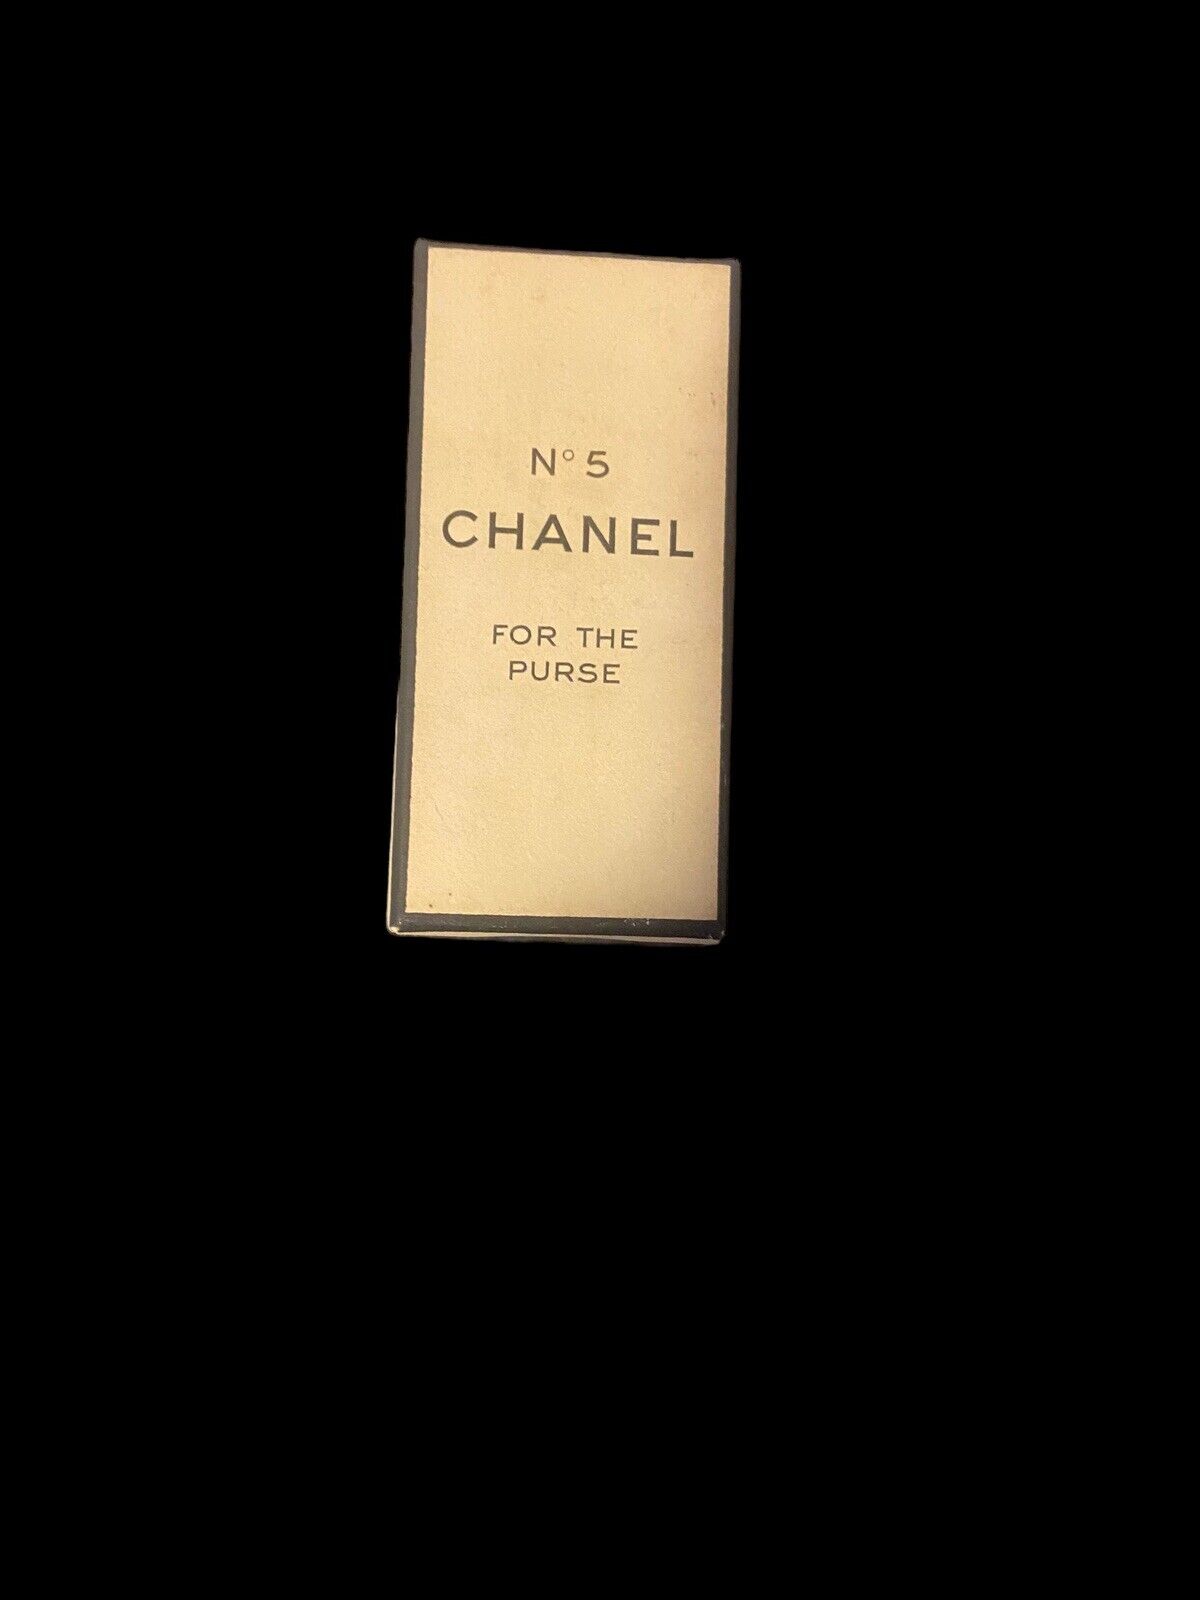 Vintage 1930’s - 1940’s CHANEL No 5 Perfume For The Purse With Presentation Box